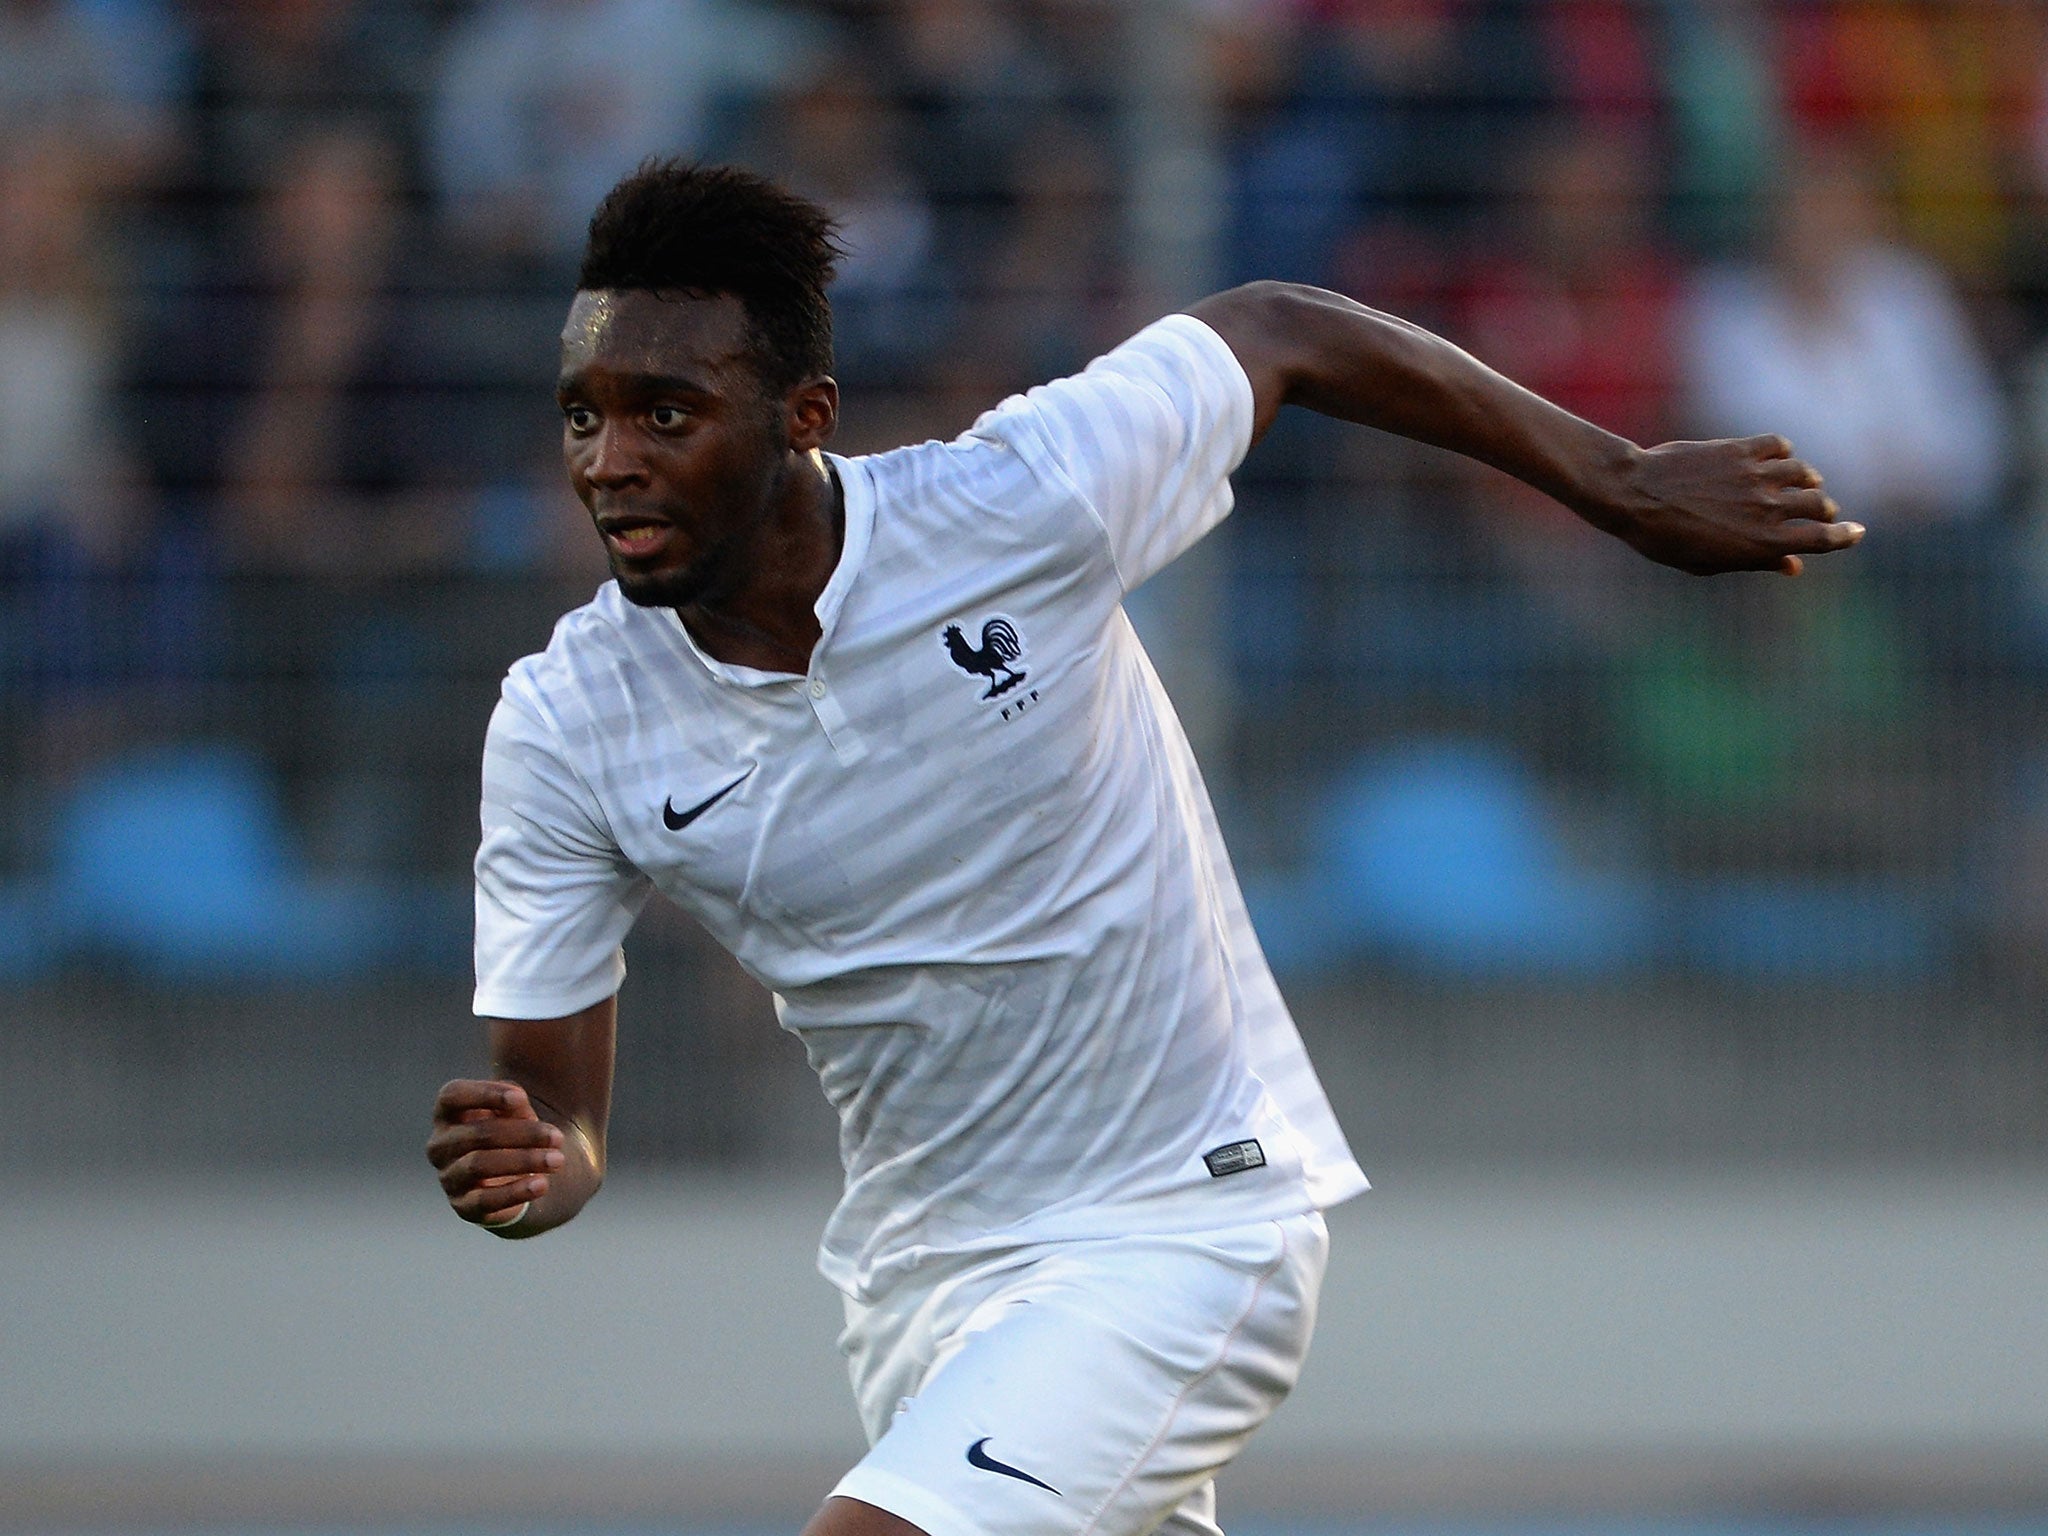 Jean-Christophe Bahebeck is a reported transfer target for Arsenal